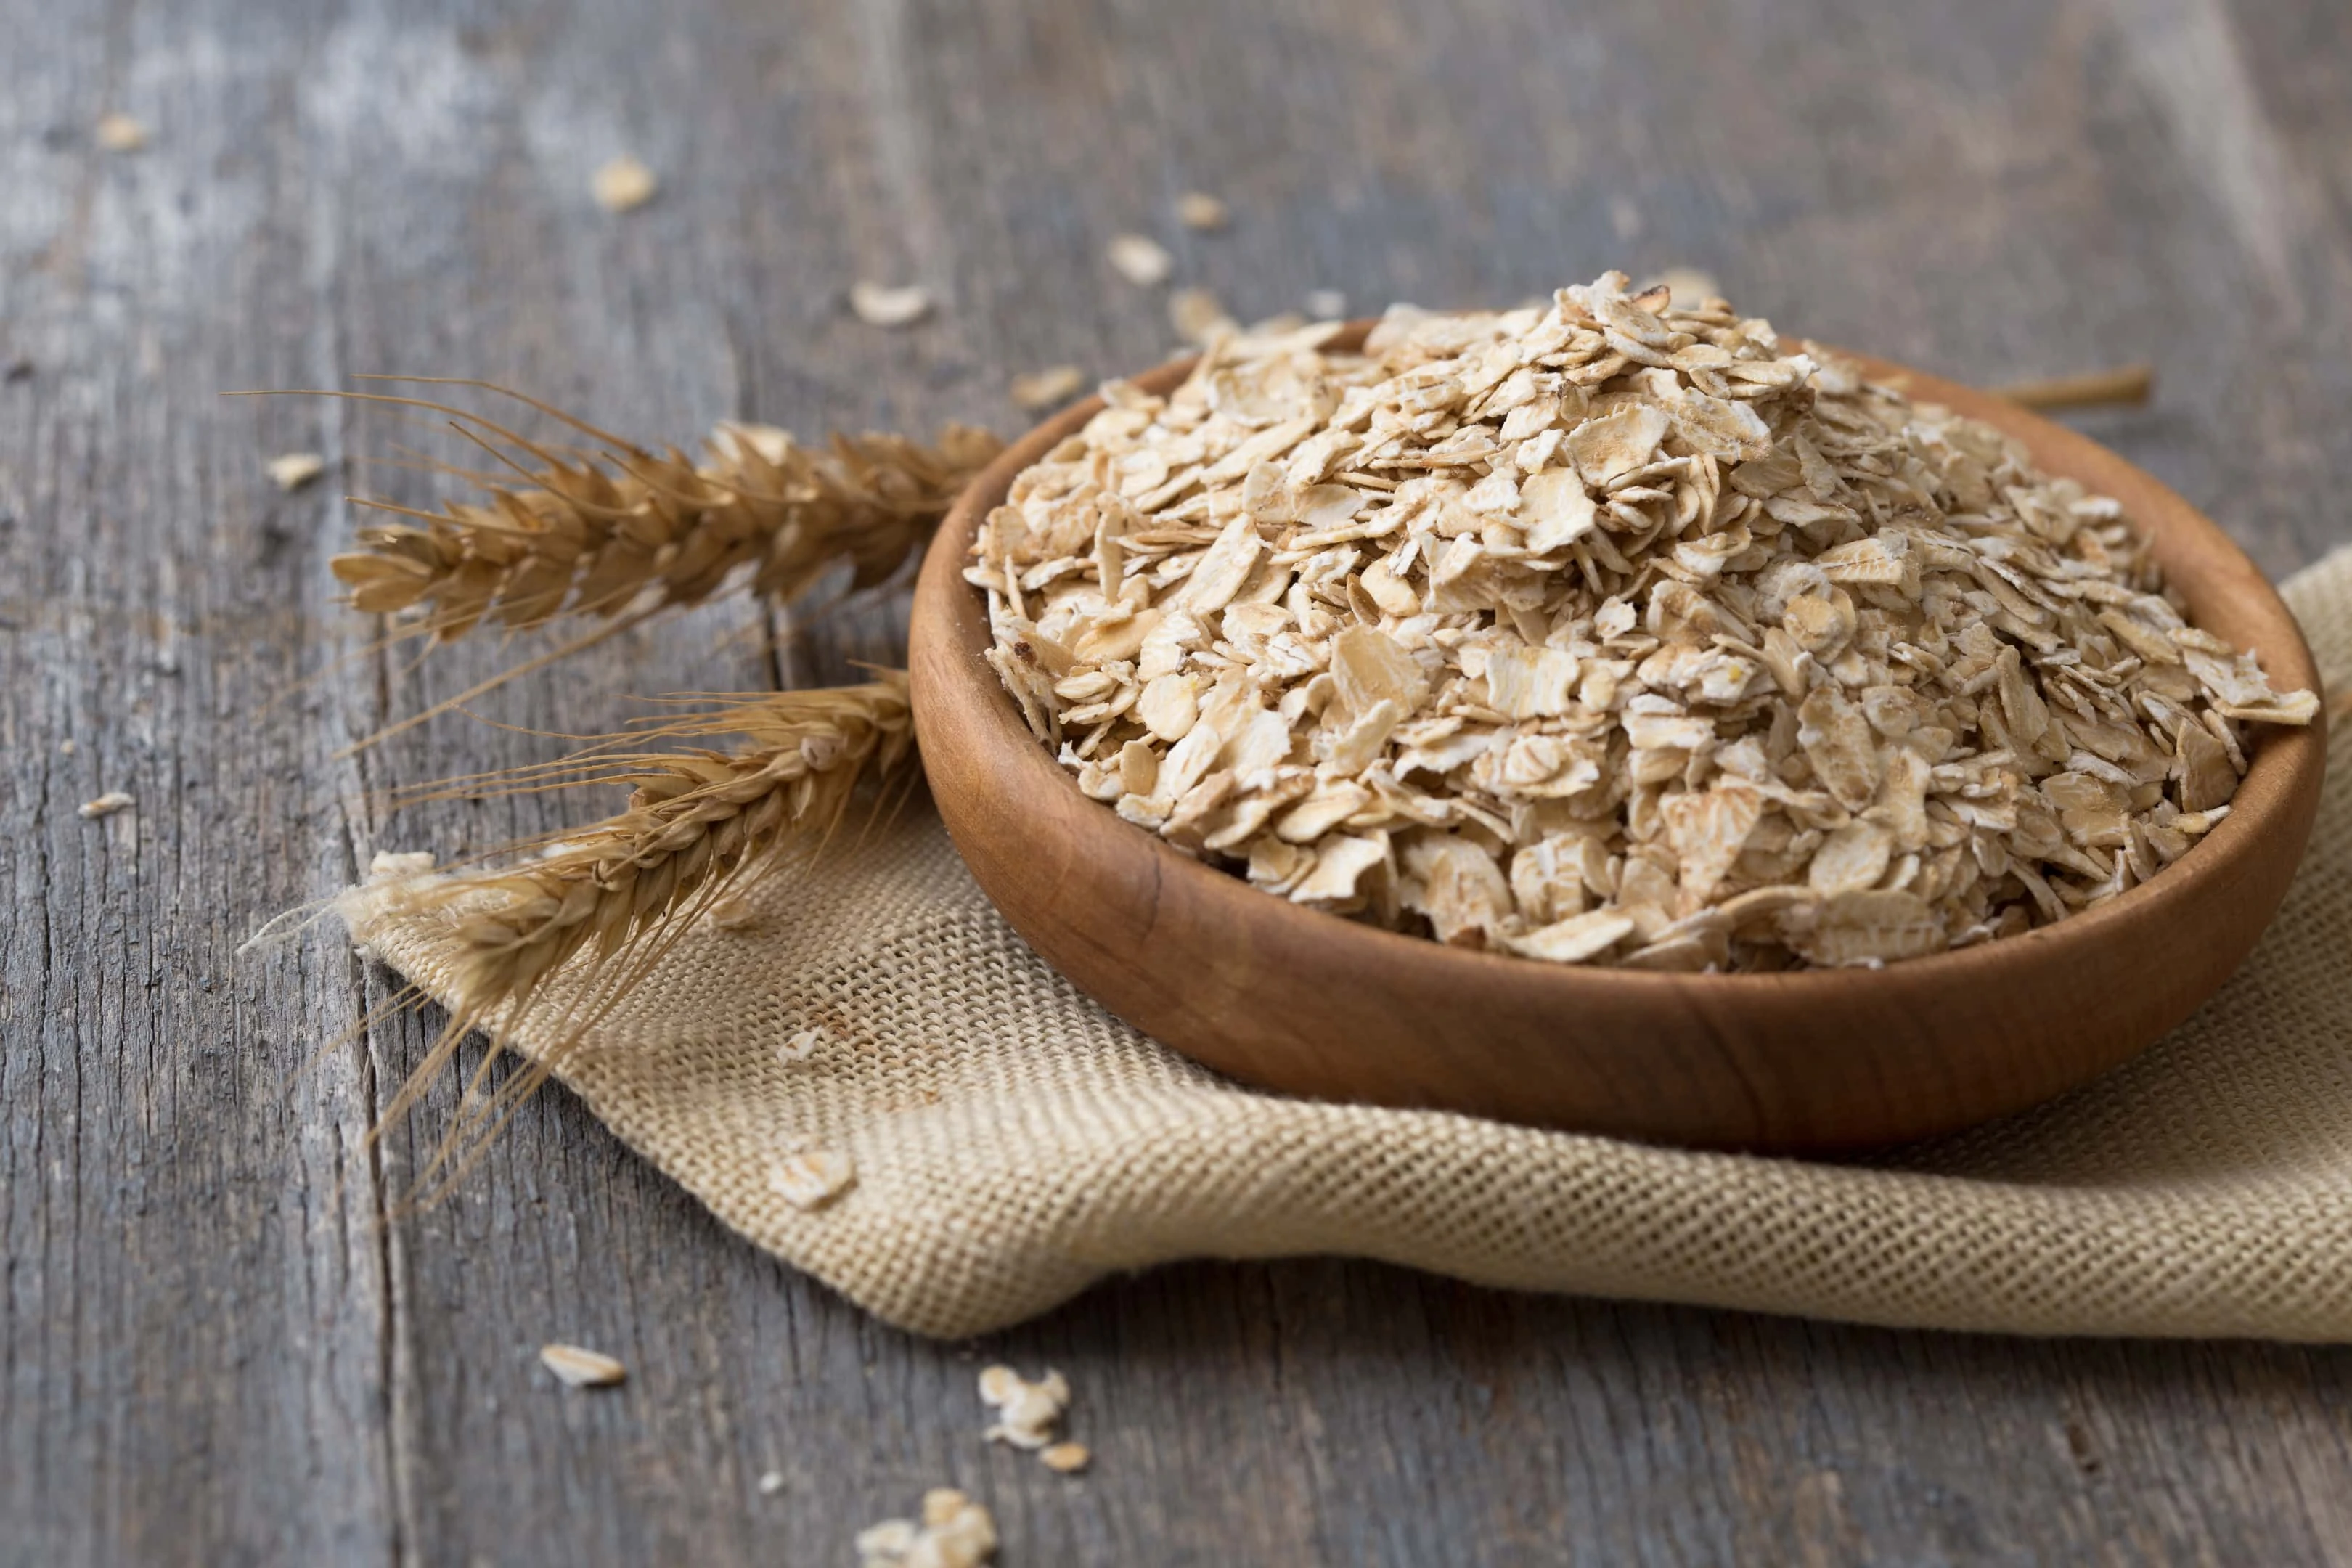 Oat flakes in wooden bowl